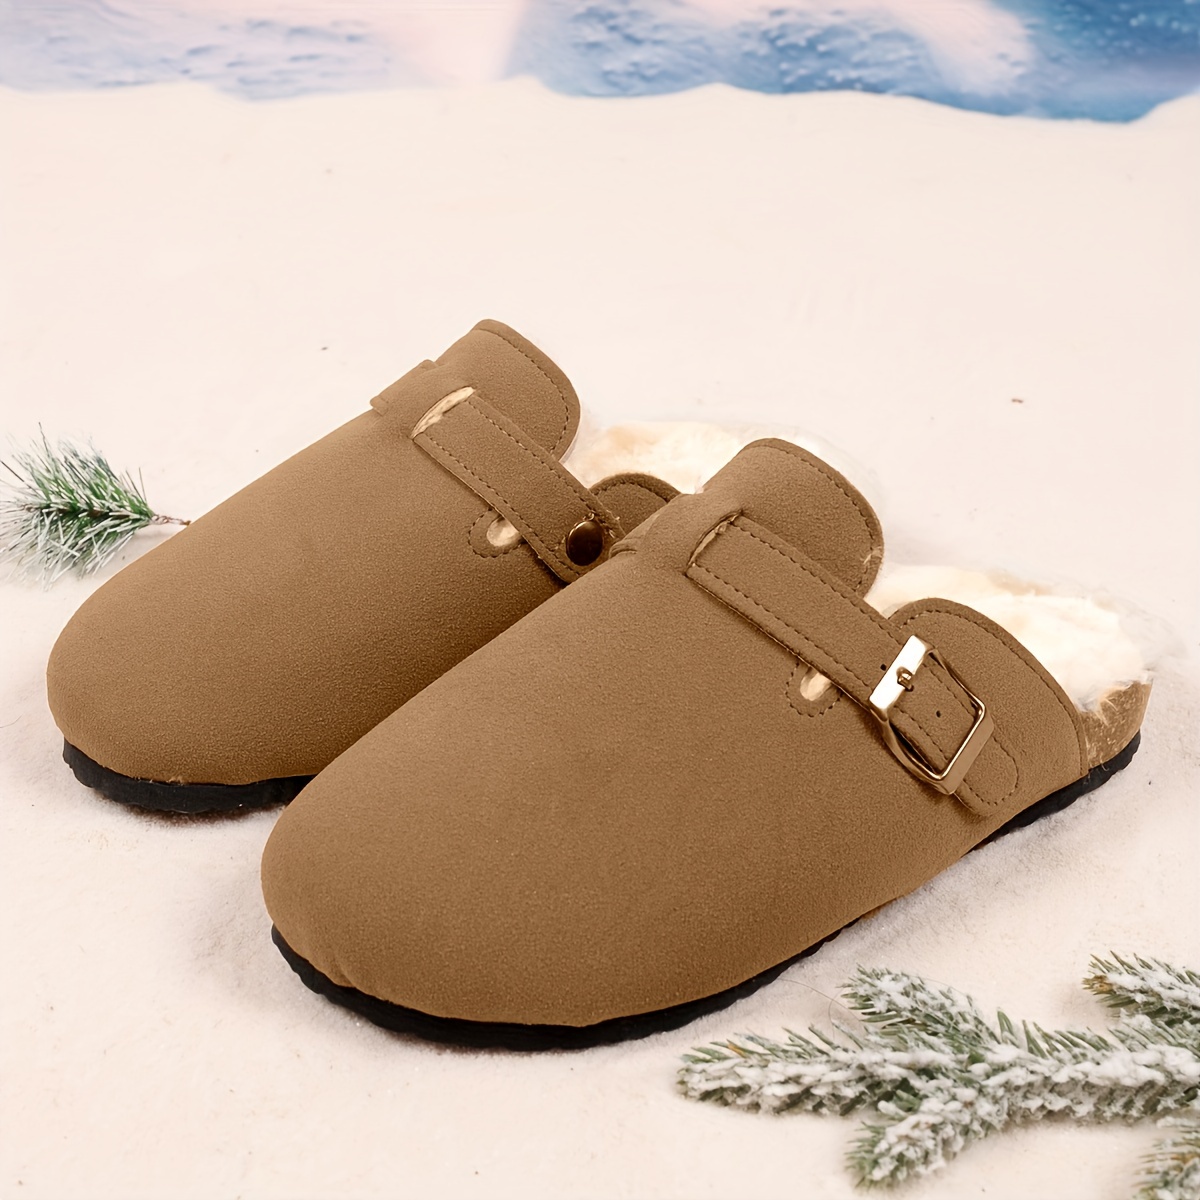 womens buckle strap detailed mules casual slip on plush lined shoes comfortable flat winter shoes details 5